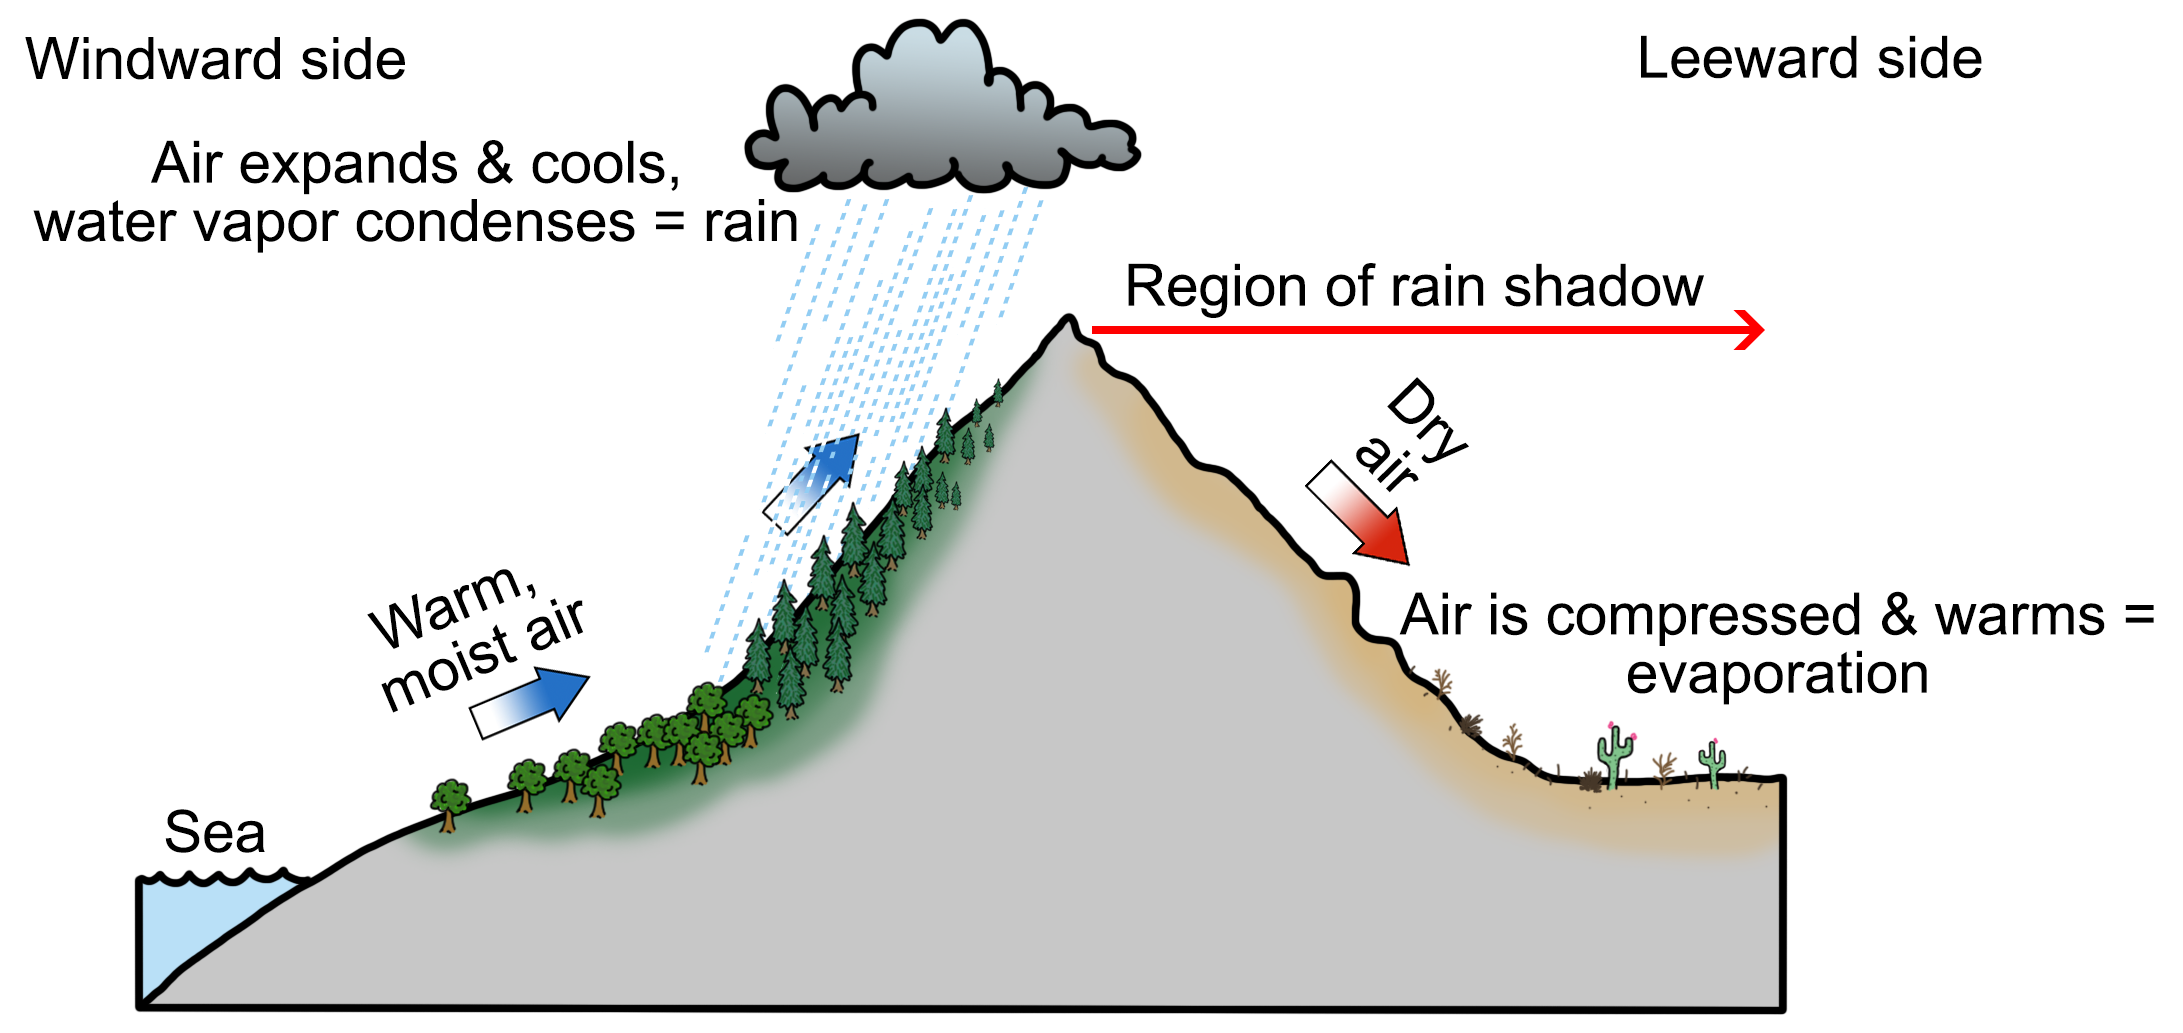 Diagram showing a rain shadow. The diagram is of a single, triangular mountain. To the left is a sea. As warm, moist air travels up the mountain from the see, it condense and cools, forming rain. On the opposite side of the mountain is the rain shadow. Dry air condenses and warms, and evaporation occurs at the foot of the leeward side of the mountain. Thus, the leeward side of the mountain is dry.